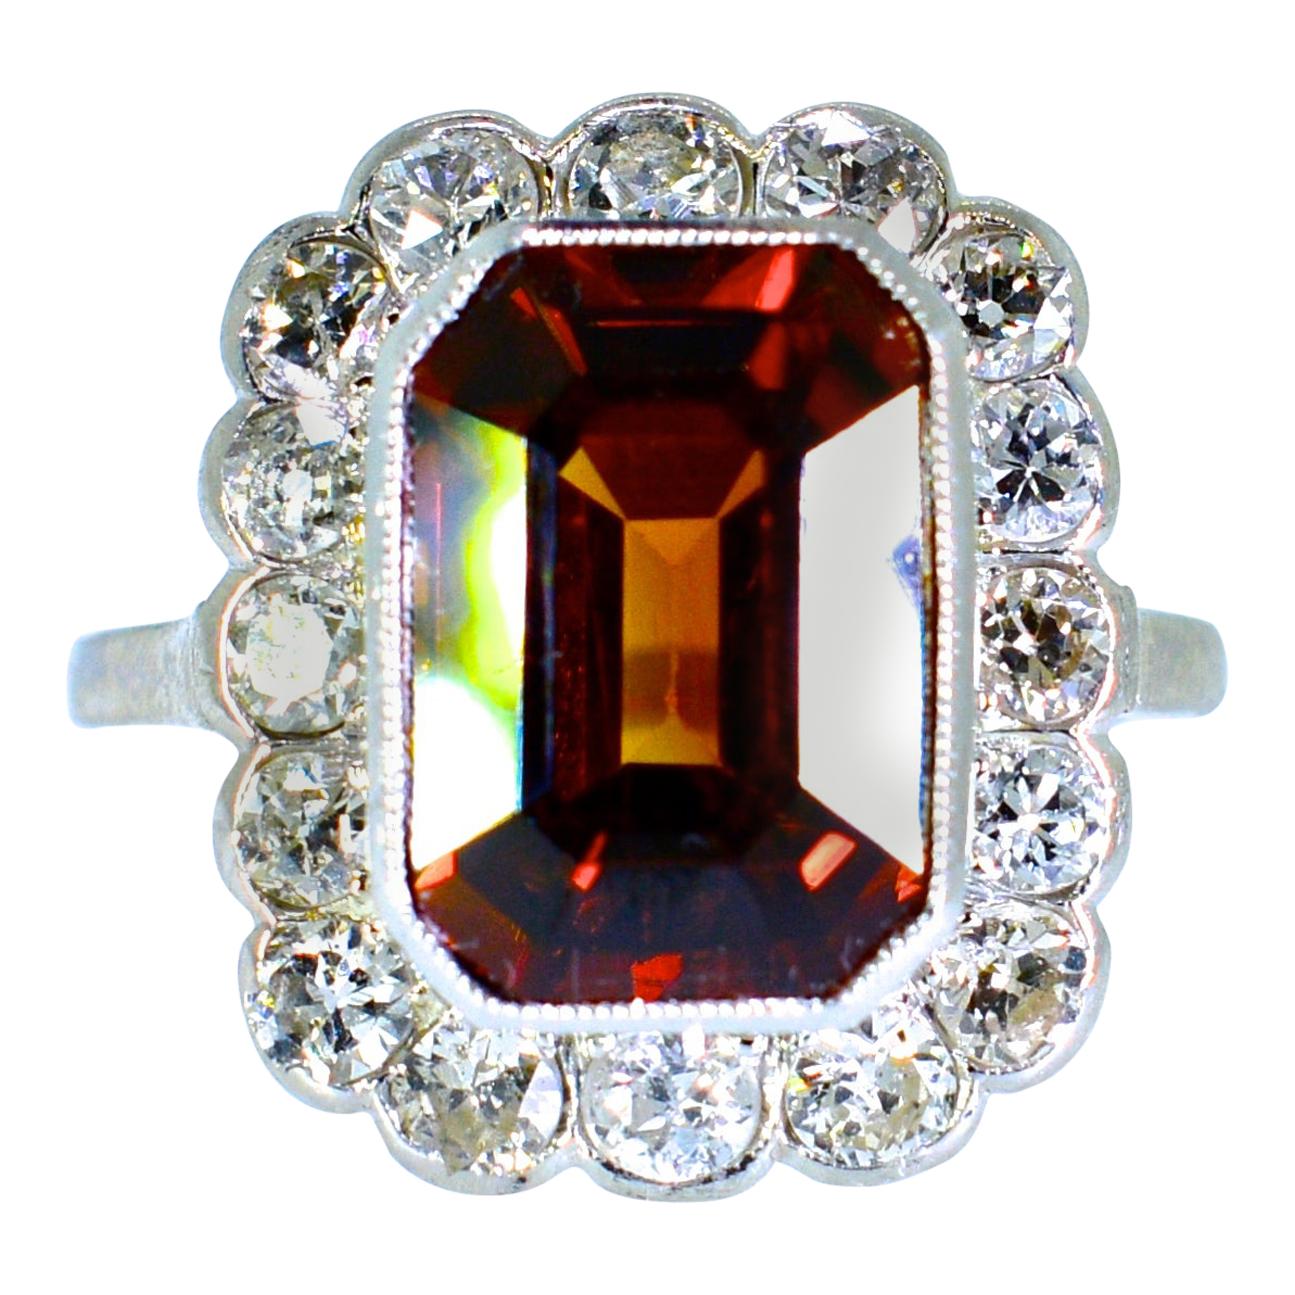  Fine natural Cognac Zircon.  The tawny color is very unusual.  It's chestnut like color has flashes of red which one rarely sees.  This stone weighs approximately 10 cts. and is surrounded by fine white old cut diamonds.  The diamonds weigh